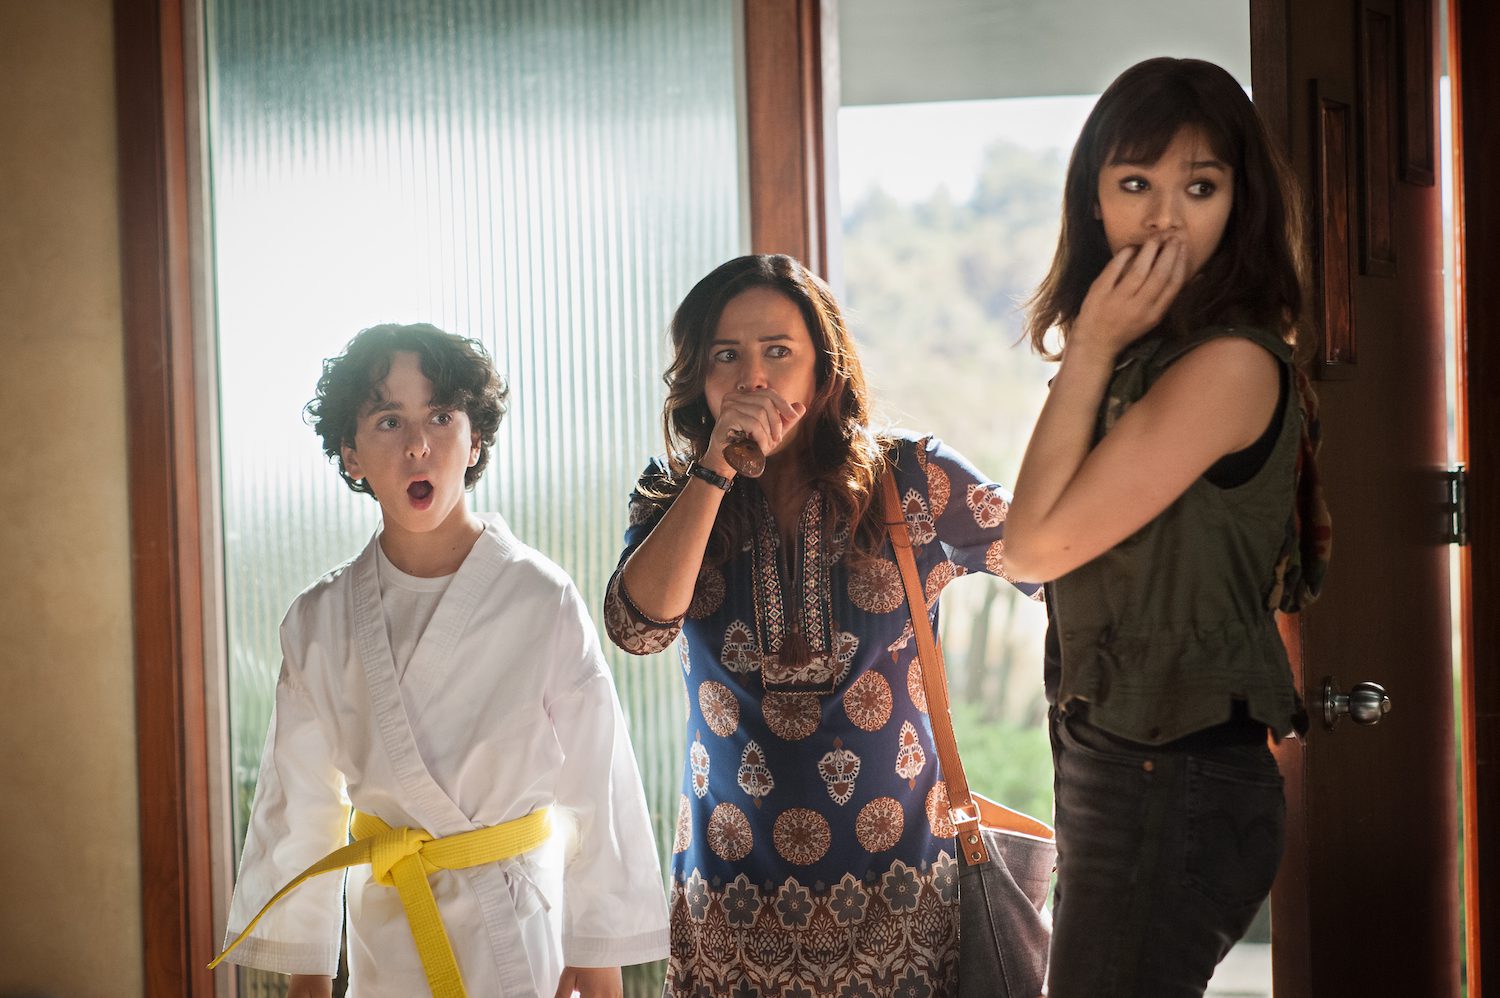 Left to right: Jason Drucker as Otis, Pamela Adlon as Sally and Hailee Steinfeld as Charlie in BUMBLEBEE, from Paramount Pictures.